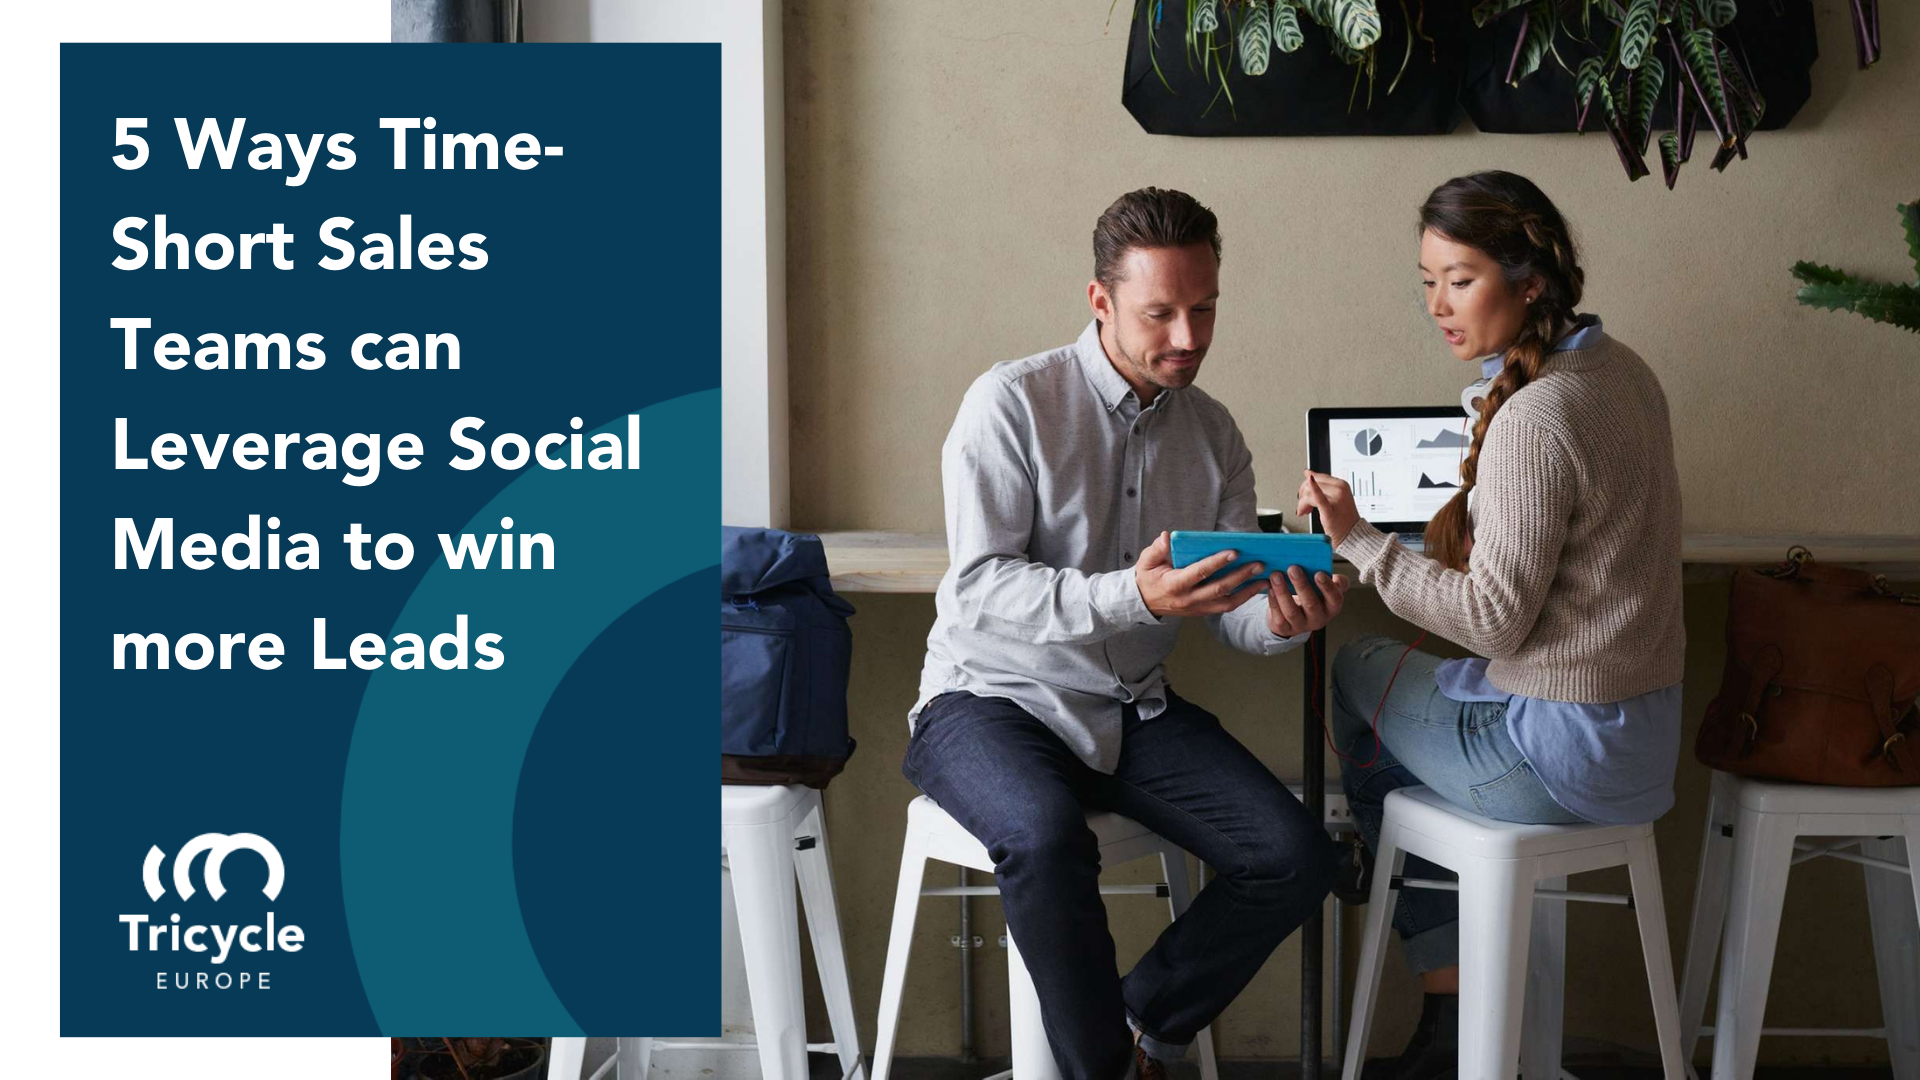 5 Ways Time-Short Sales Teams can Leverage Social Media to Win More Leads